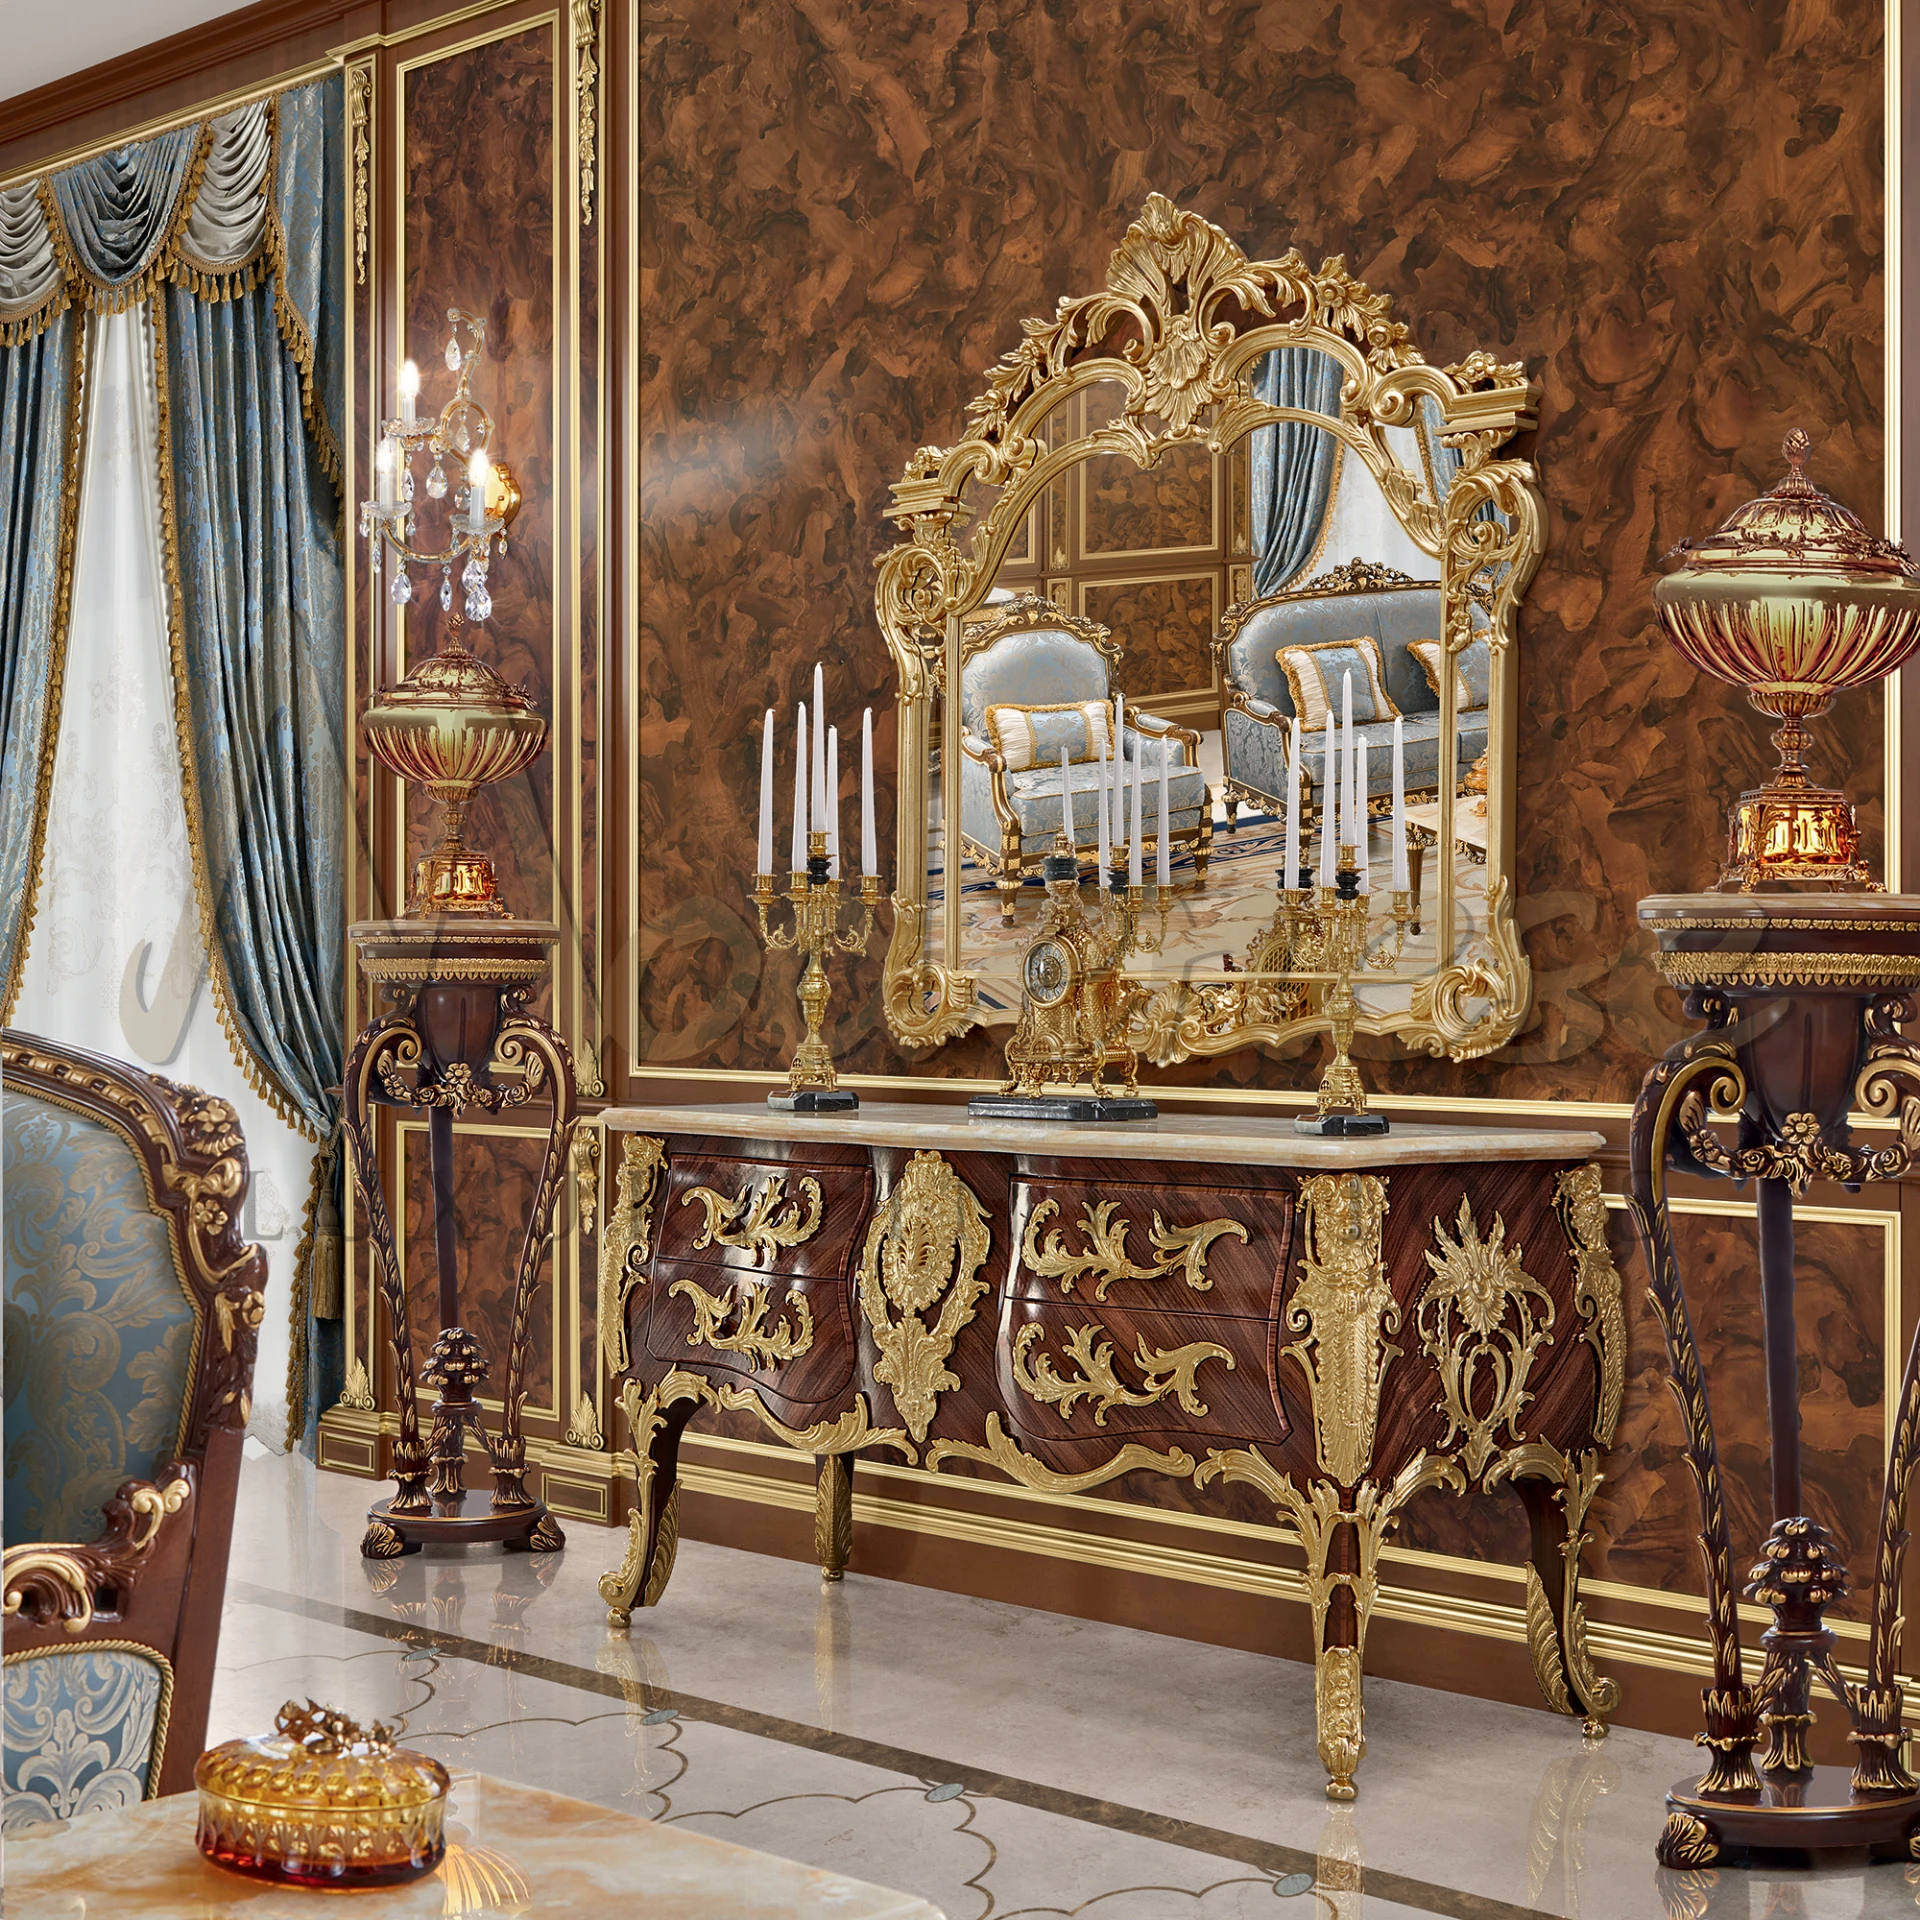 Crafted in Italy, this detailed High-End Figured Mirror adds a touch of baroque elegance to your home decor.